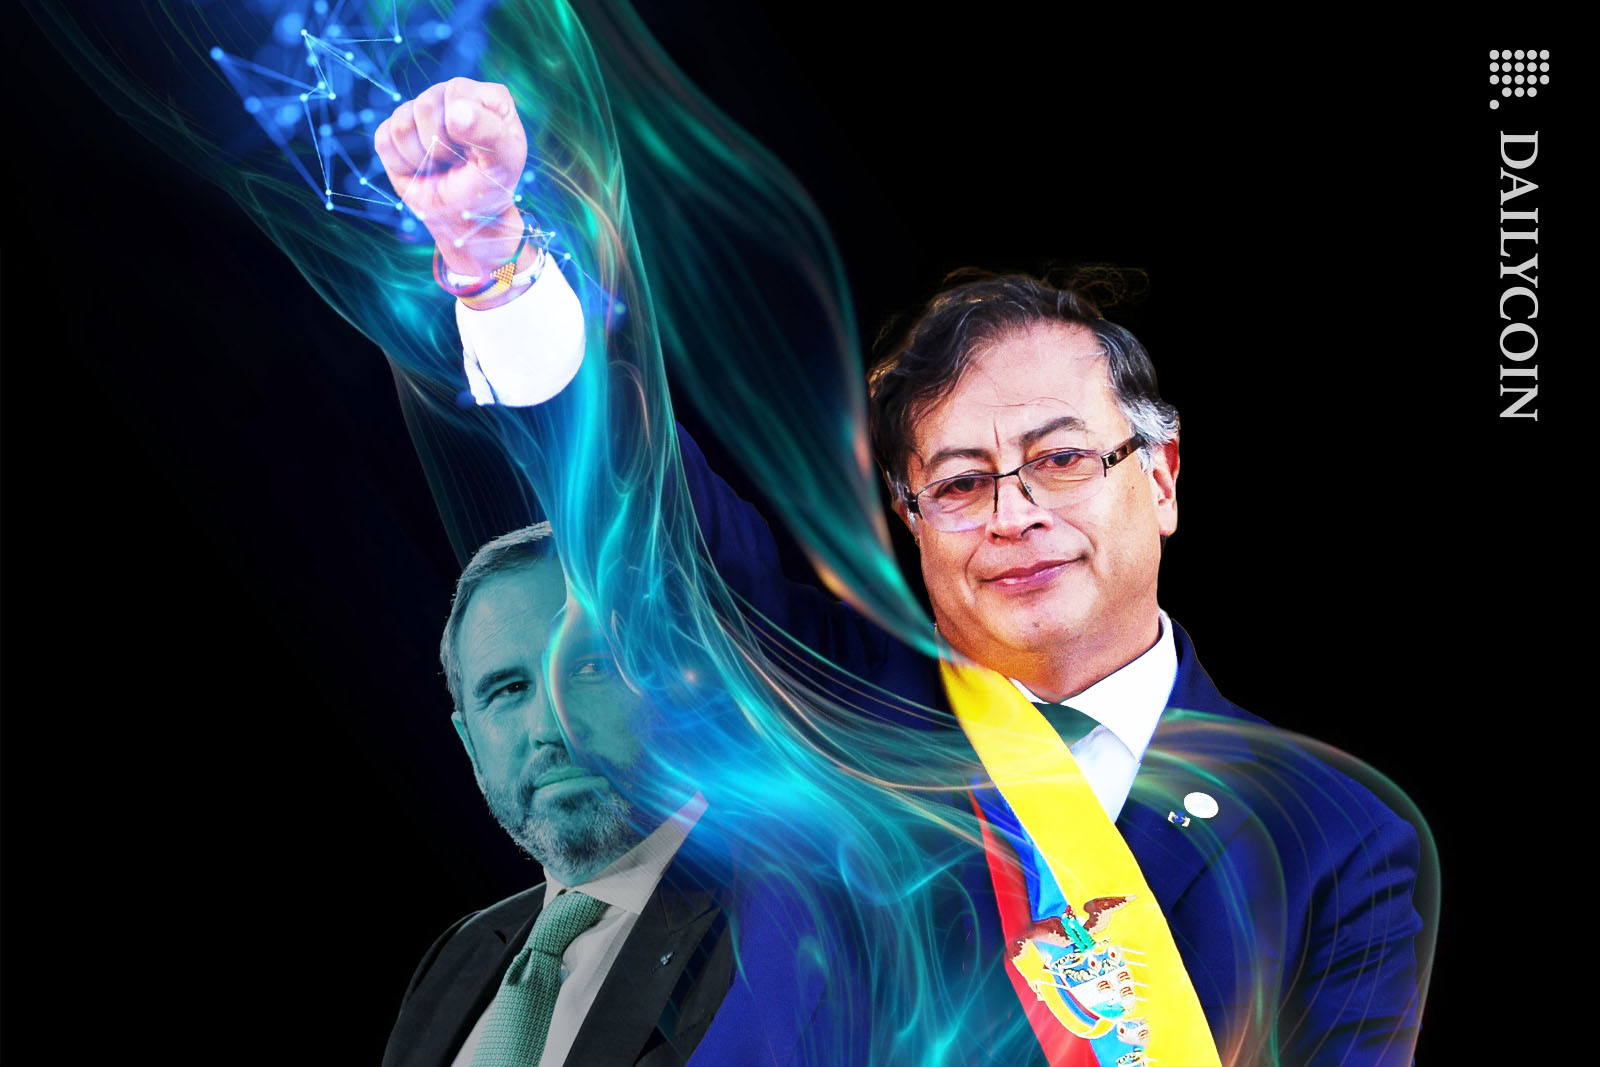 Gustavo Petro holding up his fist, sending energy waves up to the sky, whilst Brad Garlinghouse smiling in the background.